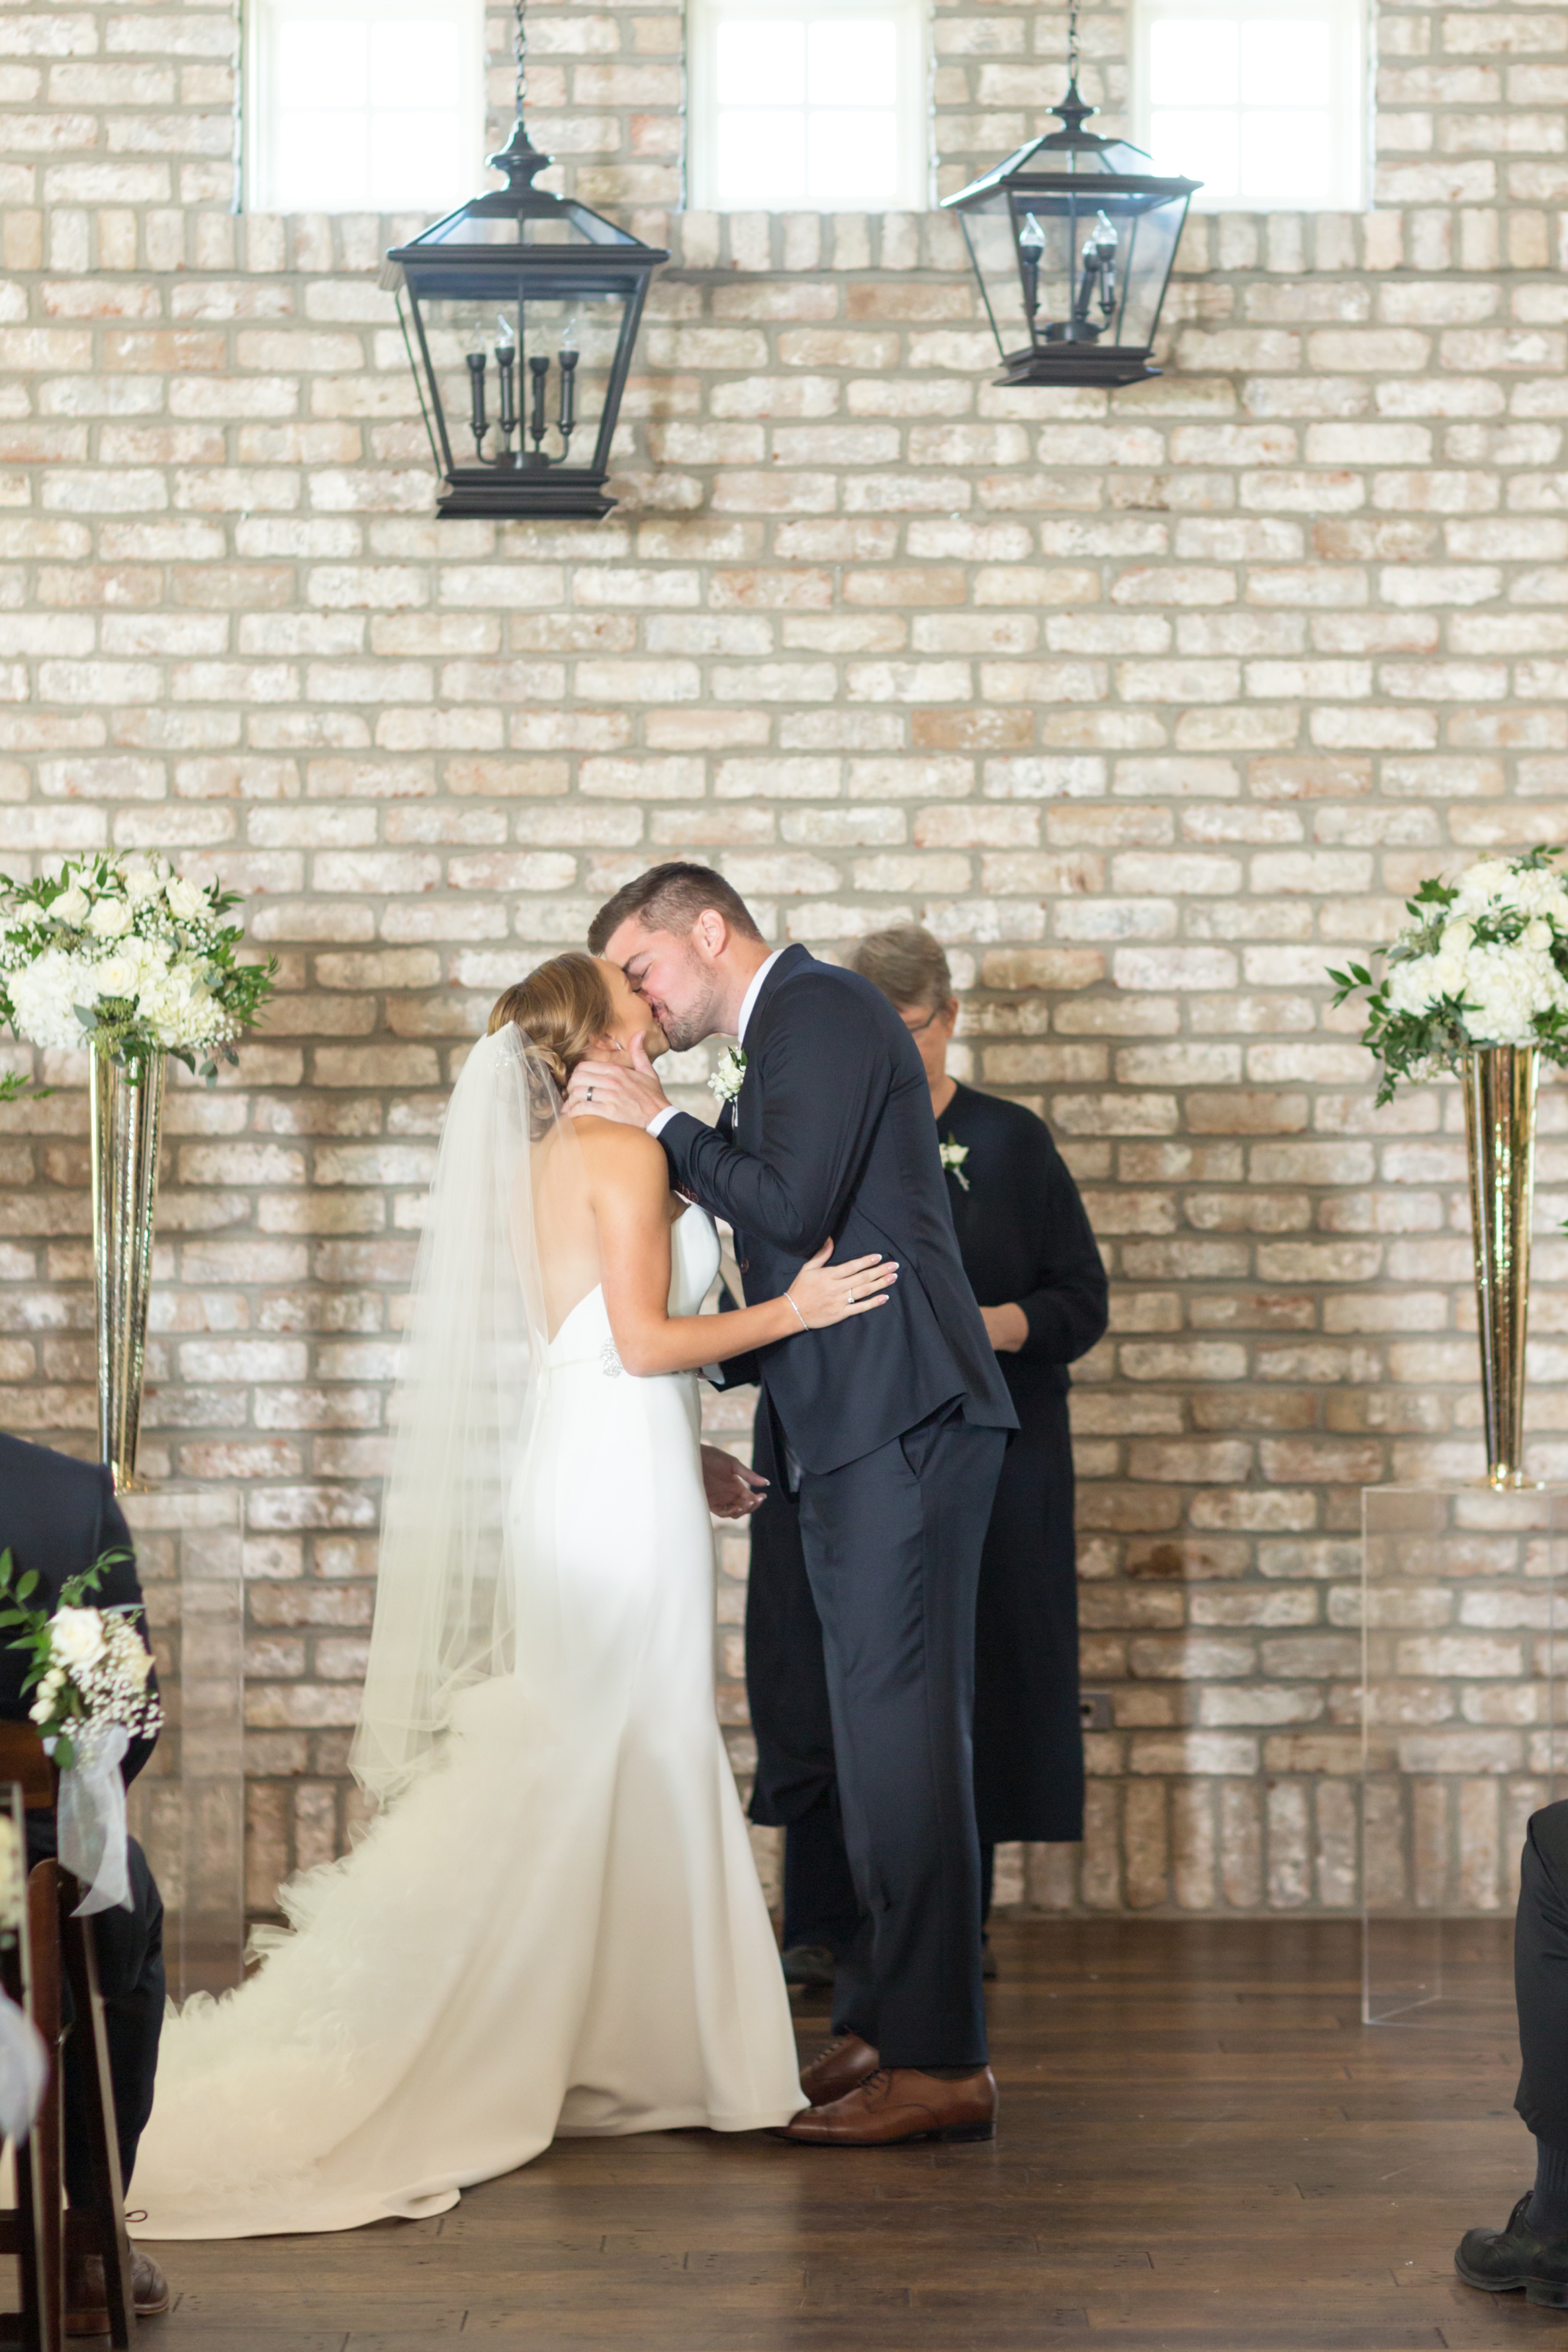 First Kiss, Ceremony at Carriage House in Ohio